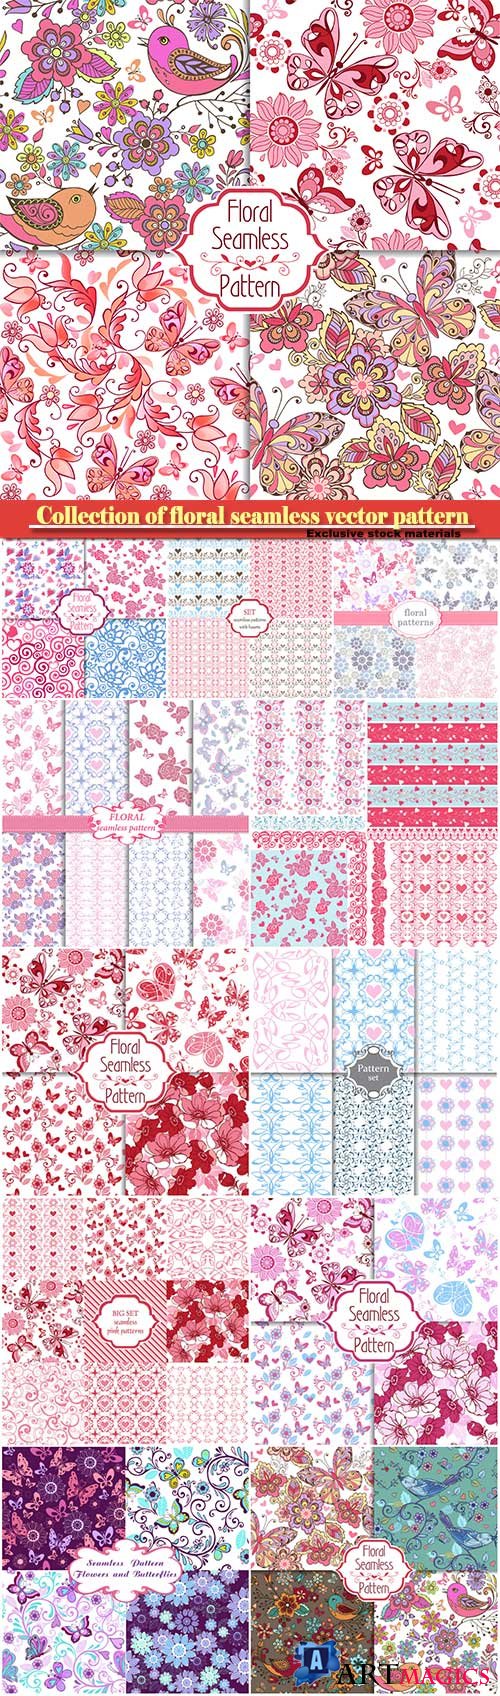 Collection of floral seamless vector pattern with decorative hearts and butterflies